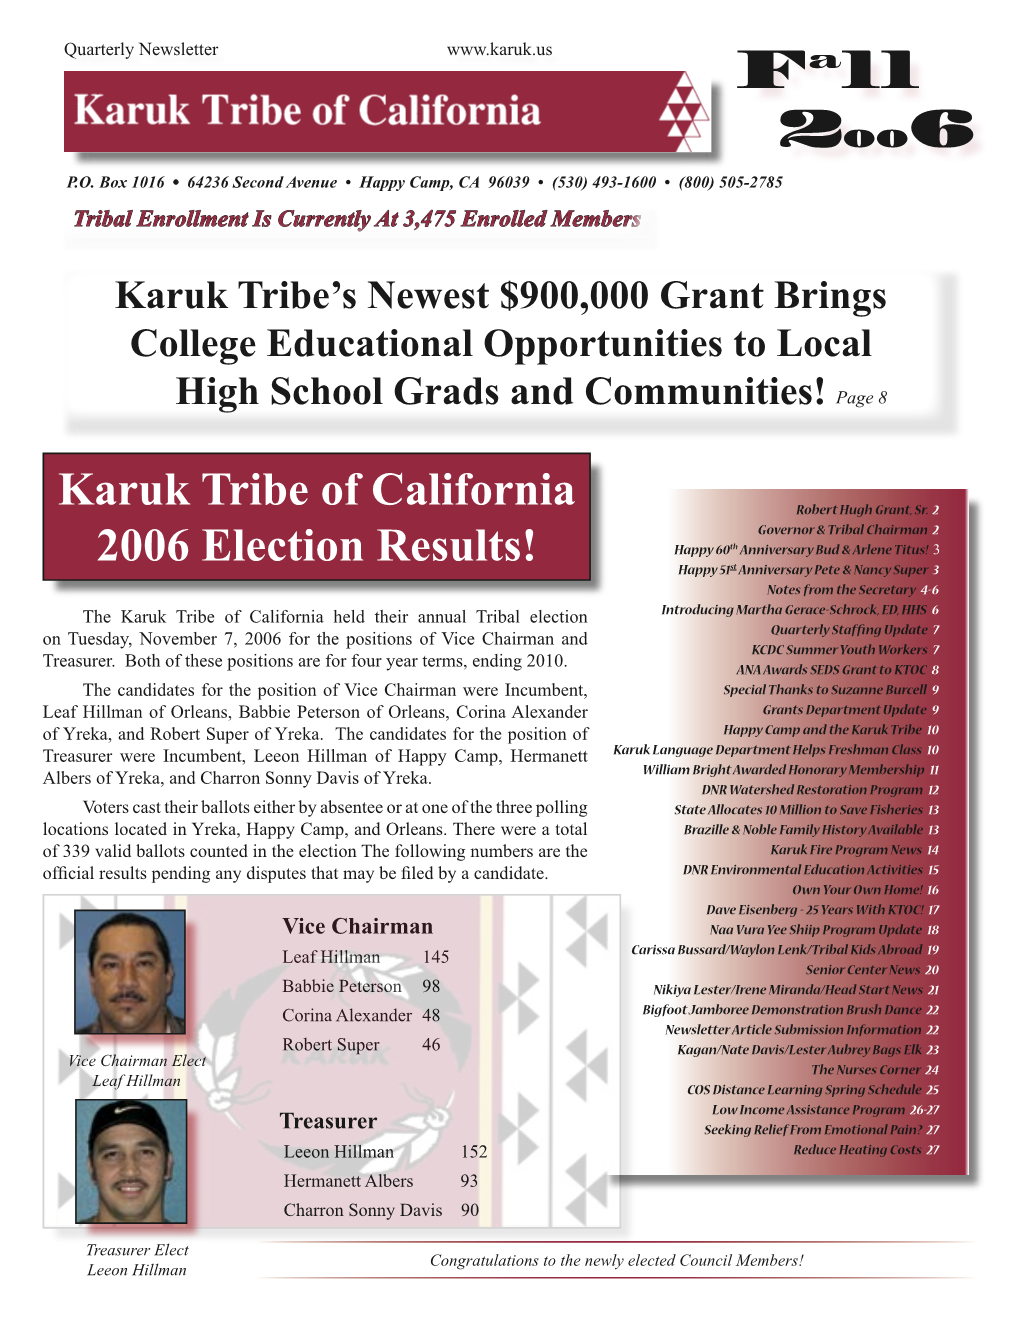 Karuk Tribe of California 2006 Election Results!